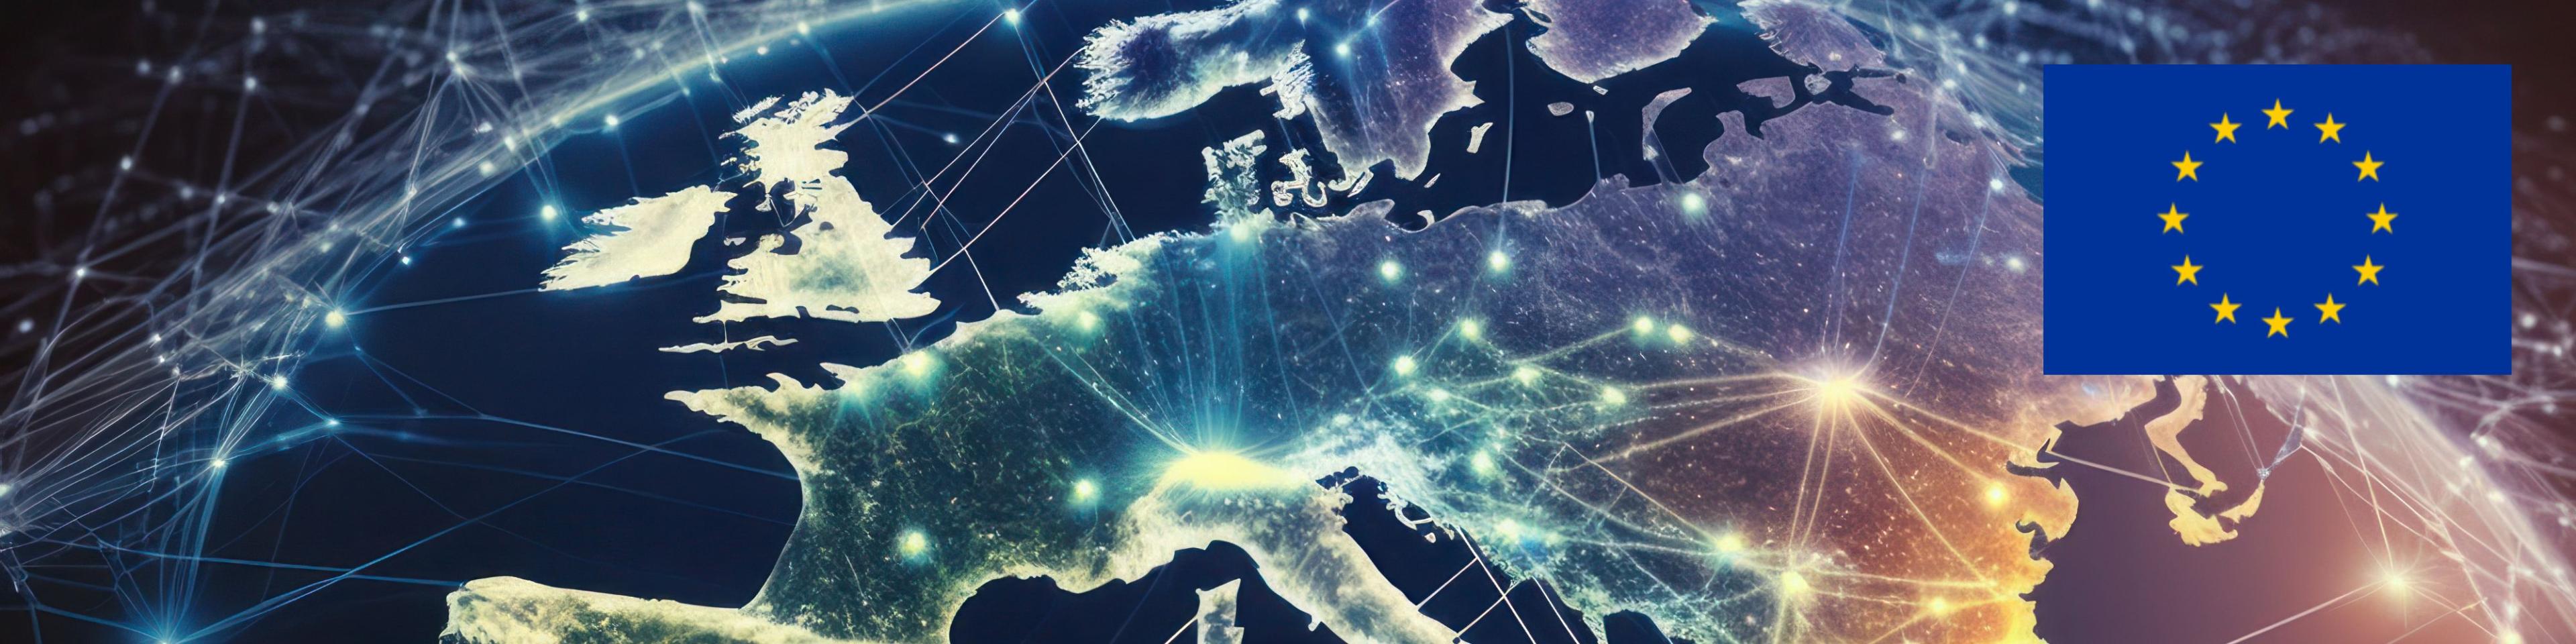 Europe is connected through communication technology to the global internet network. European connection lines for data transfer and communication. IoT, business, money, and security